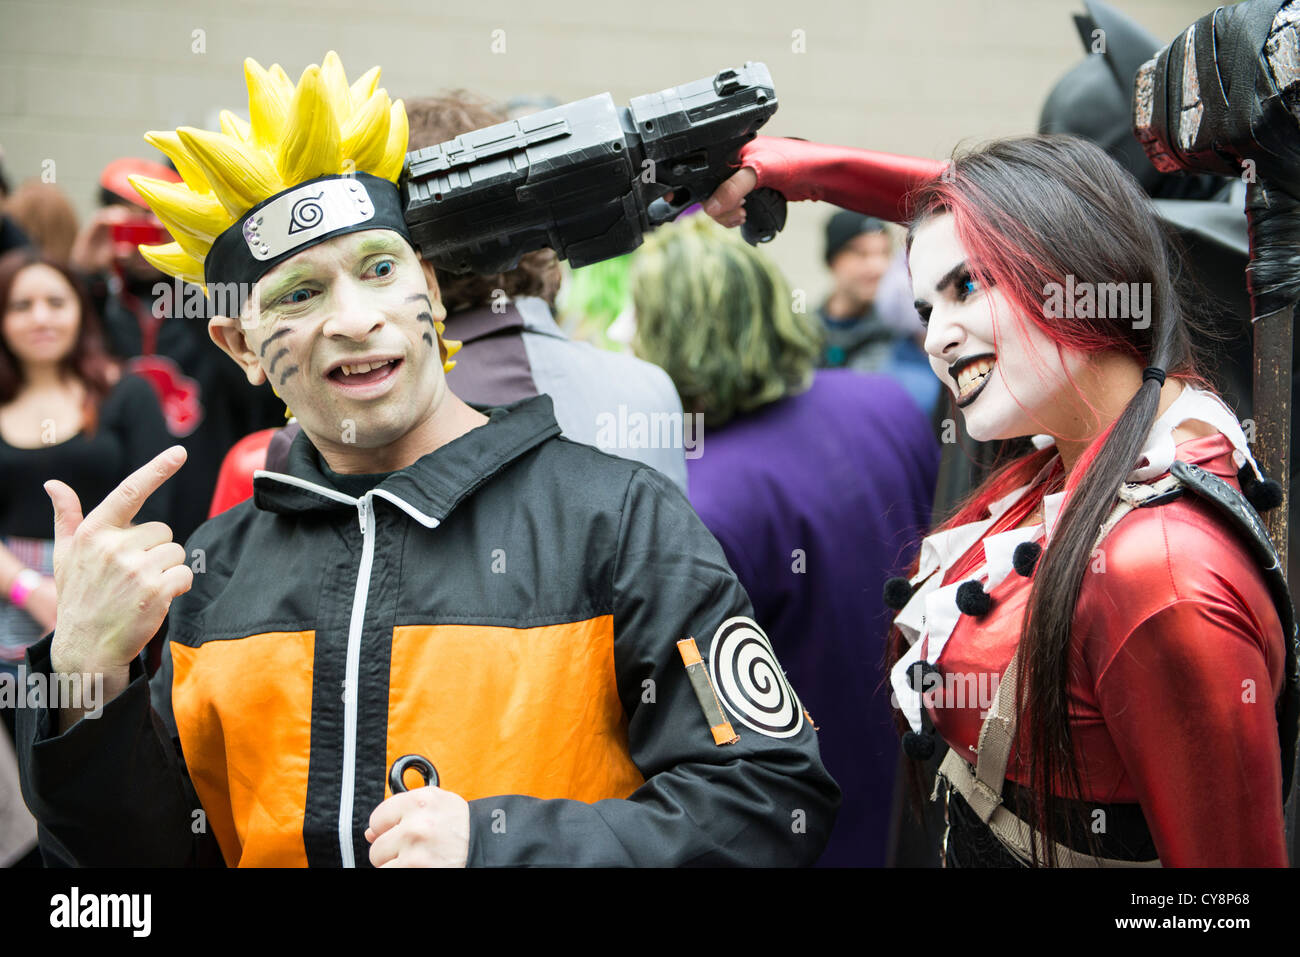 LONDON, UK - OCTOBER 28: Cosplayers impersonating Naruto and Harley Quinn pose for photographers at the London Comicon MCM Expo. Stock Photo